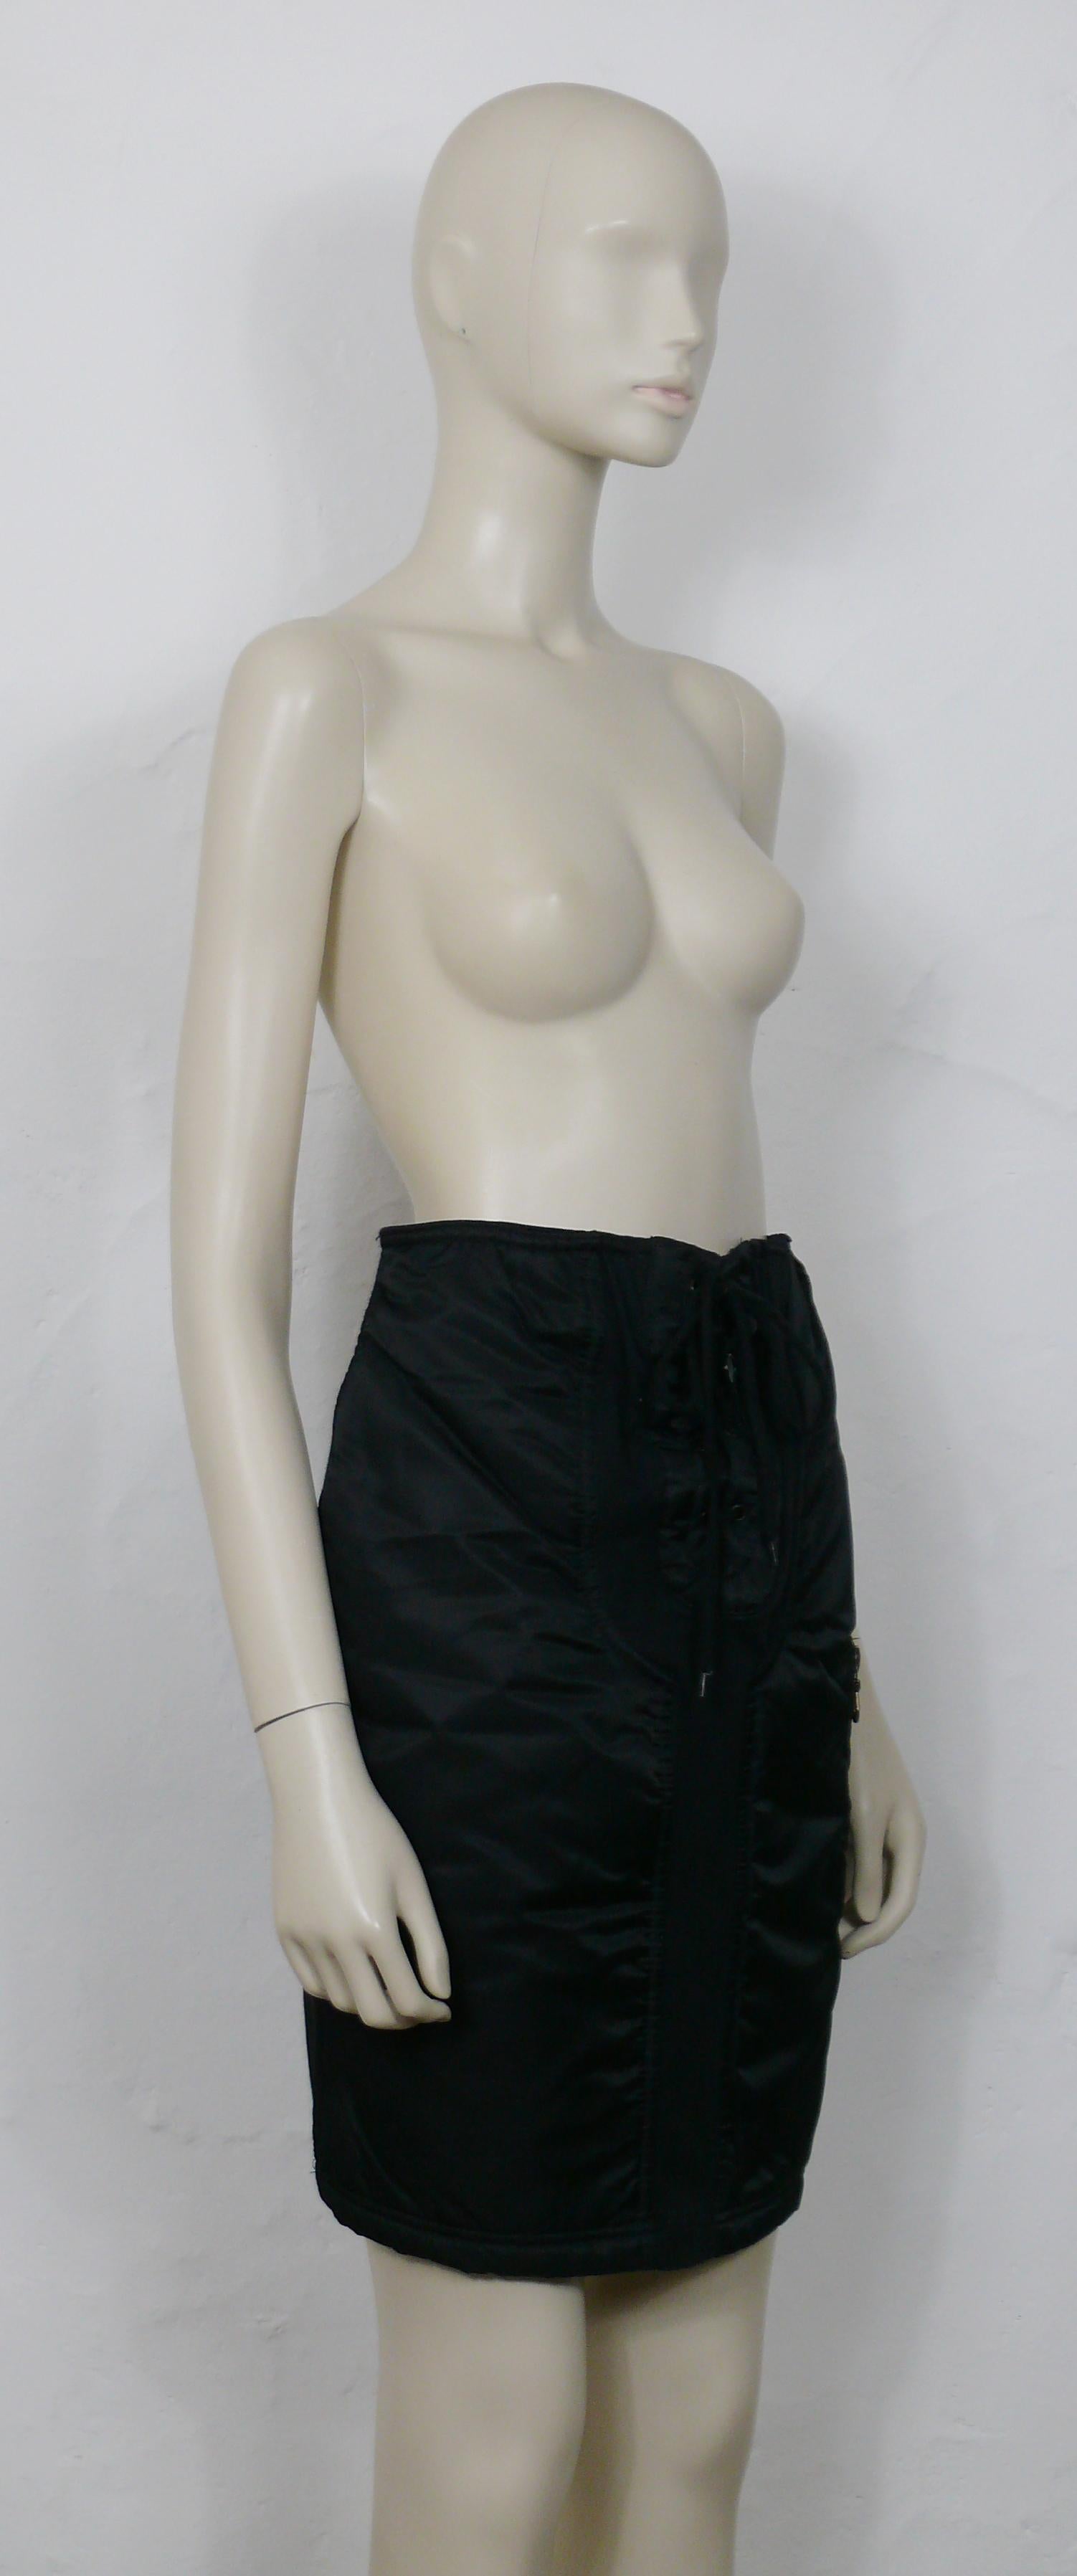 JEAN PAUL GAULTIER JUNIOR vintage black padded skirt.

This skirt features :
- Black glossed padded panels on front.
- Black stretchy material on the back and yoke on front.
- Lace front.
- Elasticated waistband.
- One zippered pocket on the front